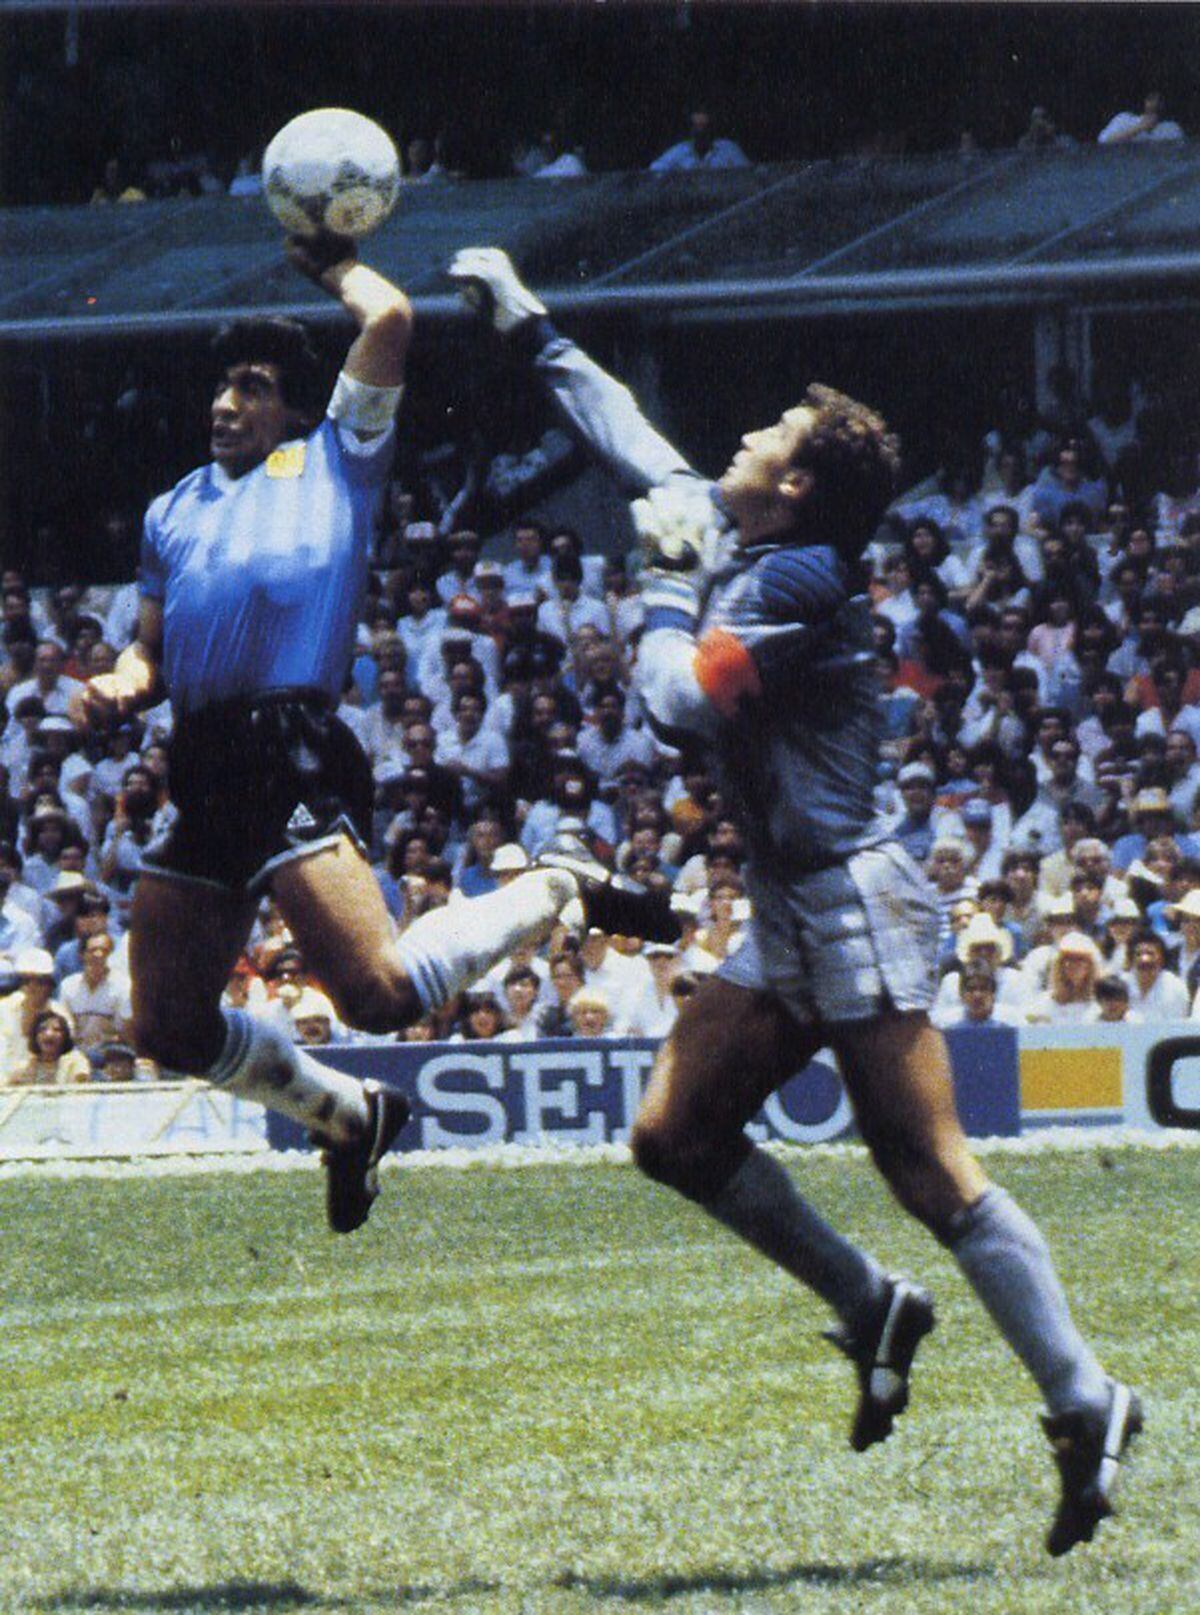 Maradona punches the goal into the net to give Argentina a 1-0 lead against England